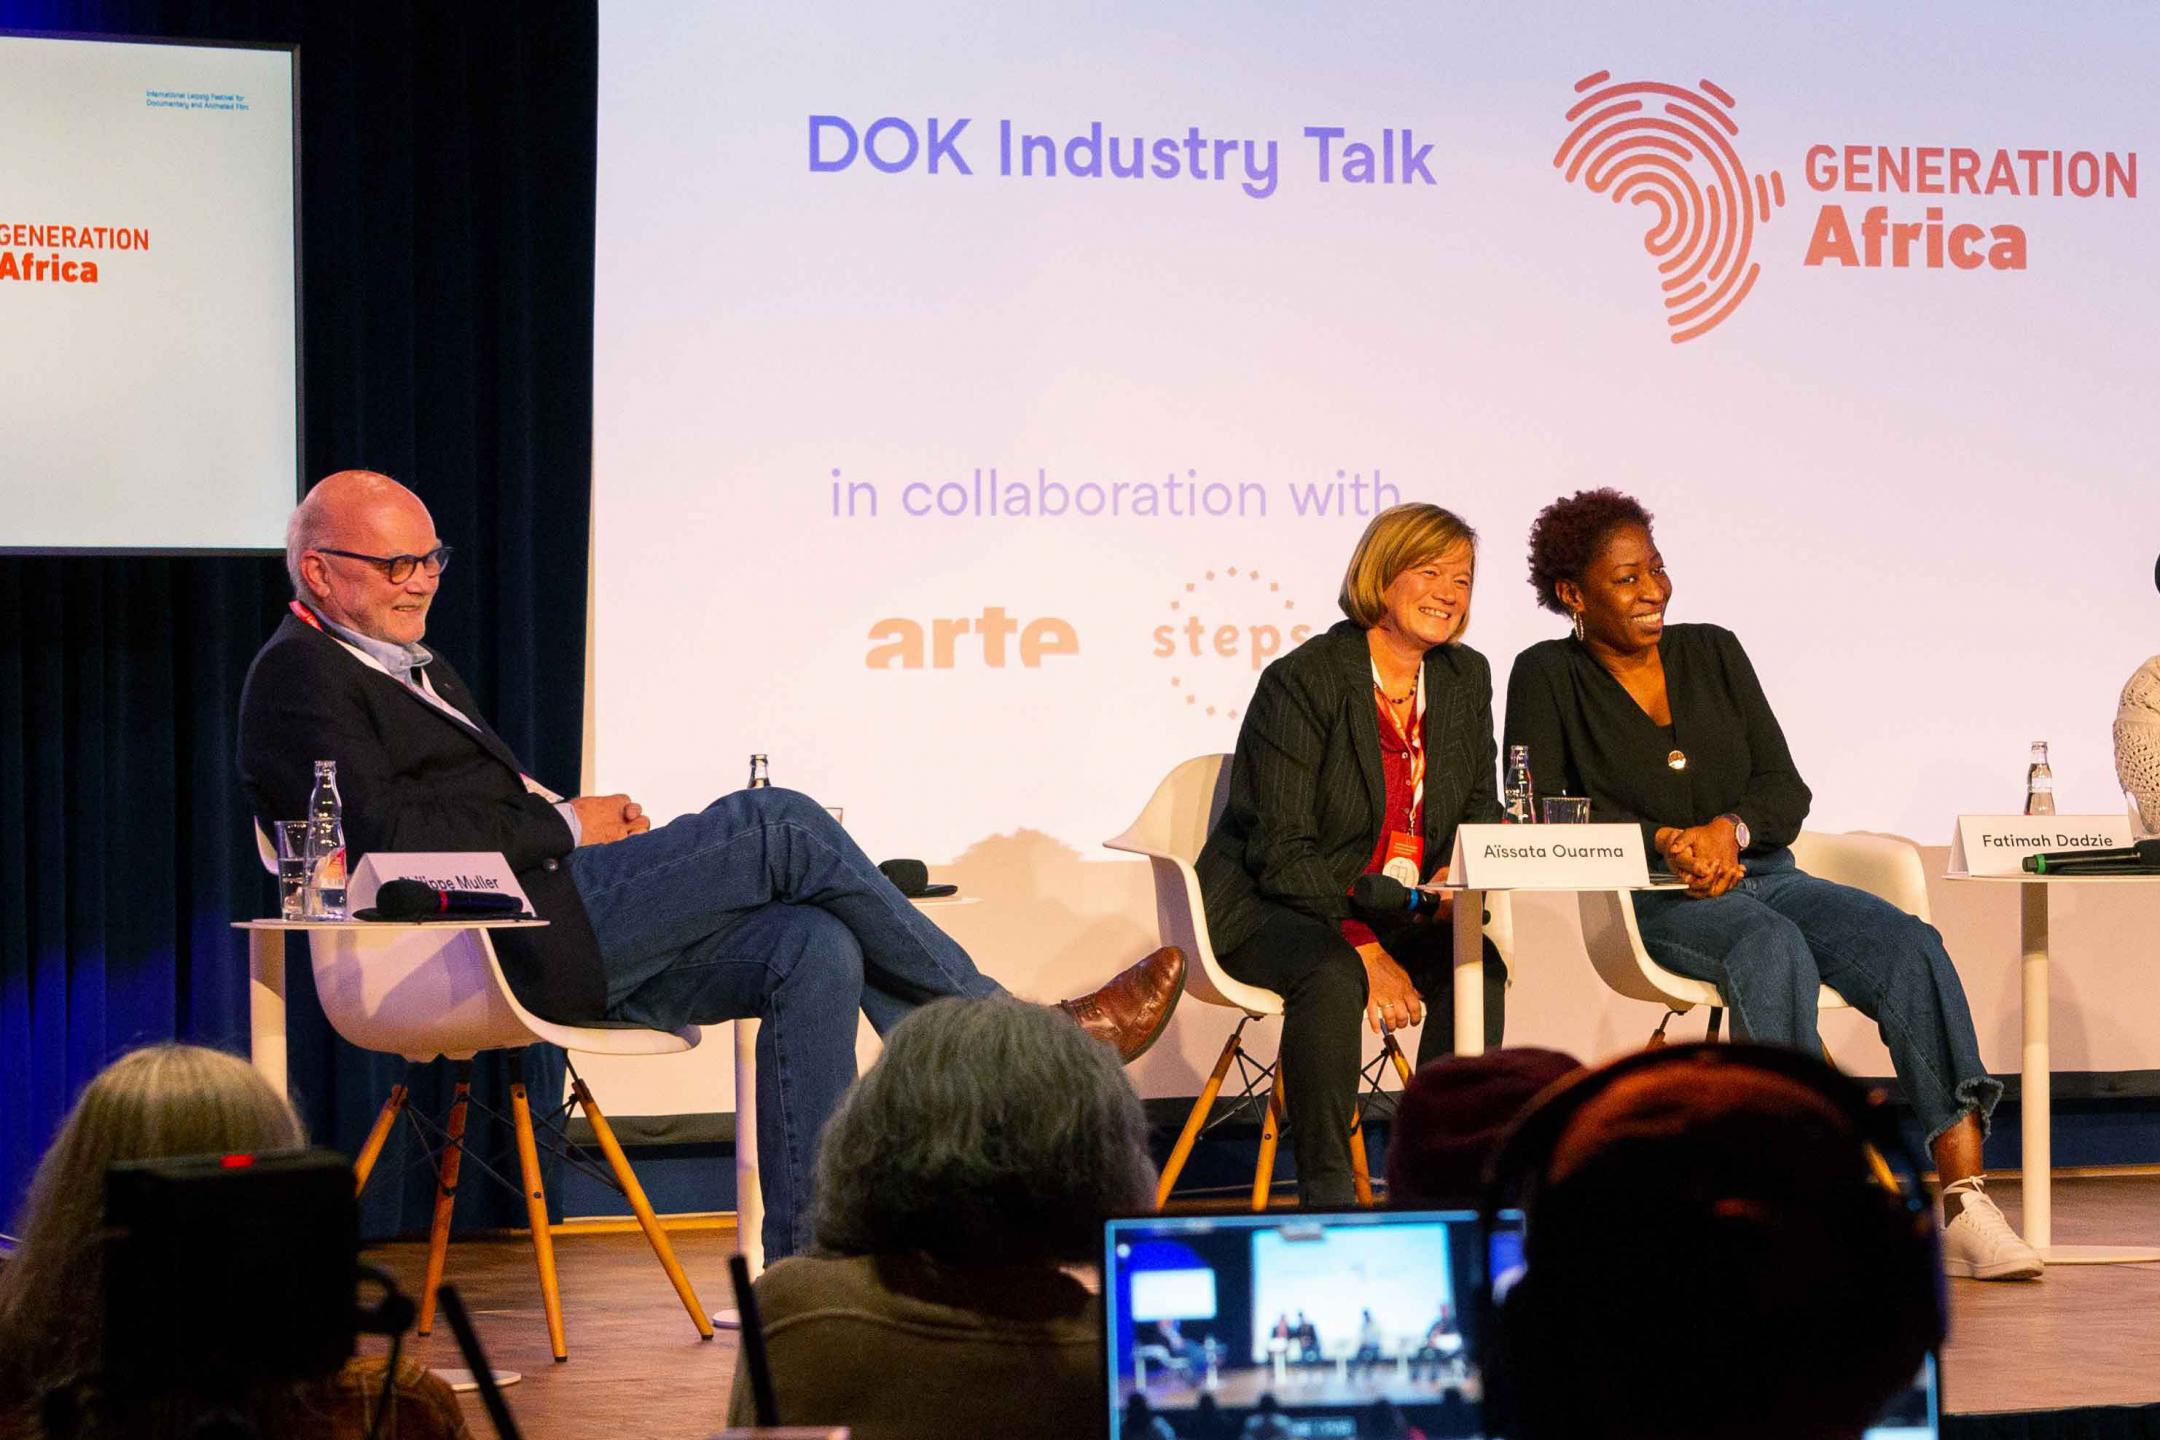 Three persons on stage of a panel, all of them laughing and looking to the audience. FLTR: A man in blue jeans, a woman with blond hair who is wearing a black suit, and a black woman with short hair. In the background a big screen with information on the event: DOK Industry Talk, below the logos of arte and steps.